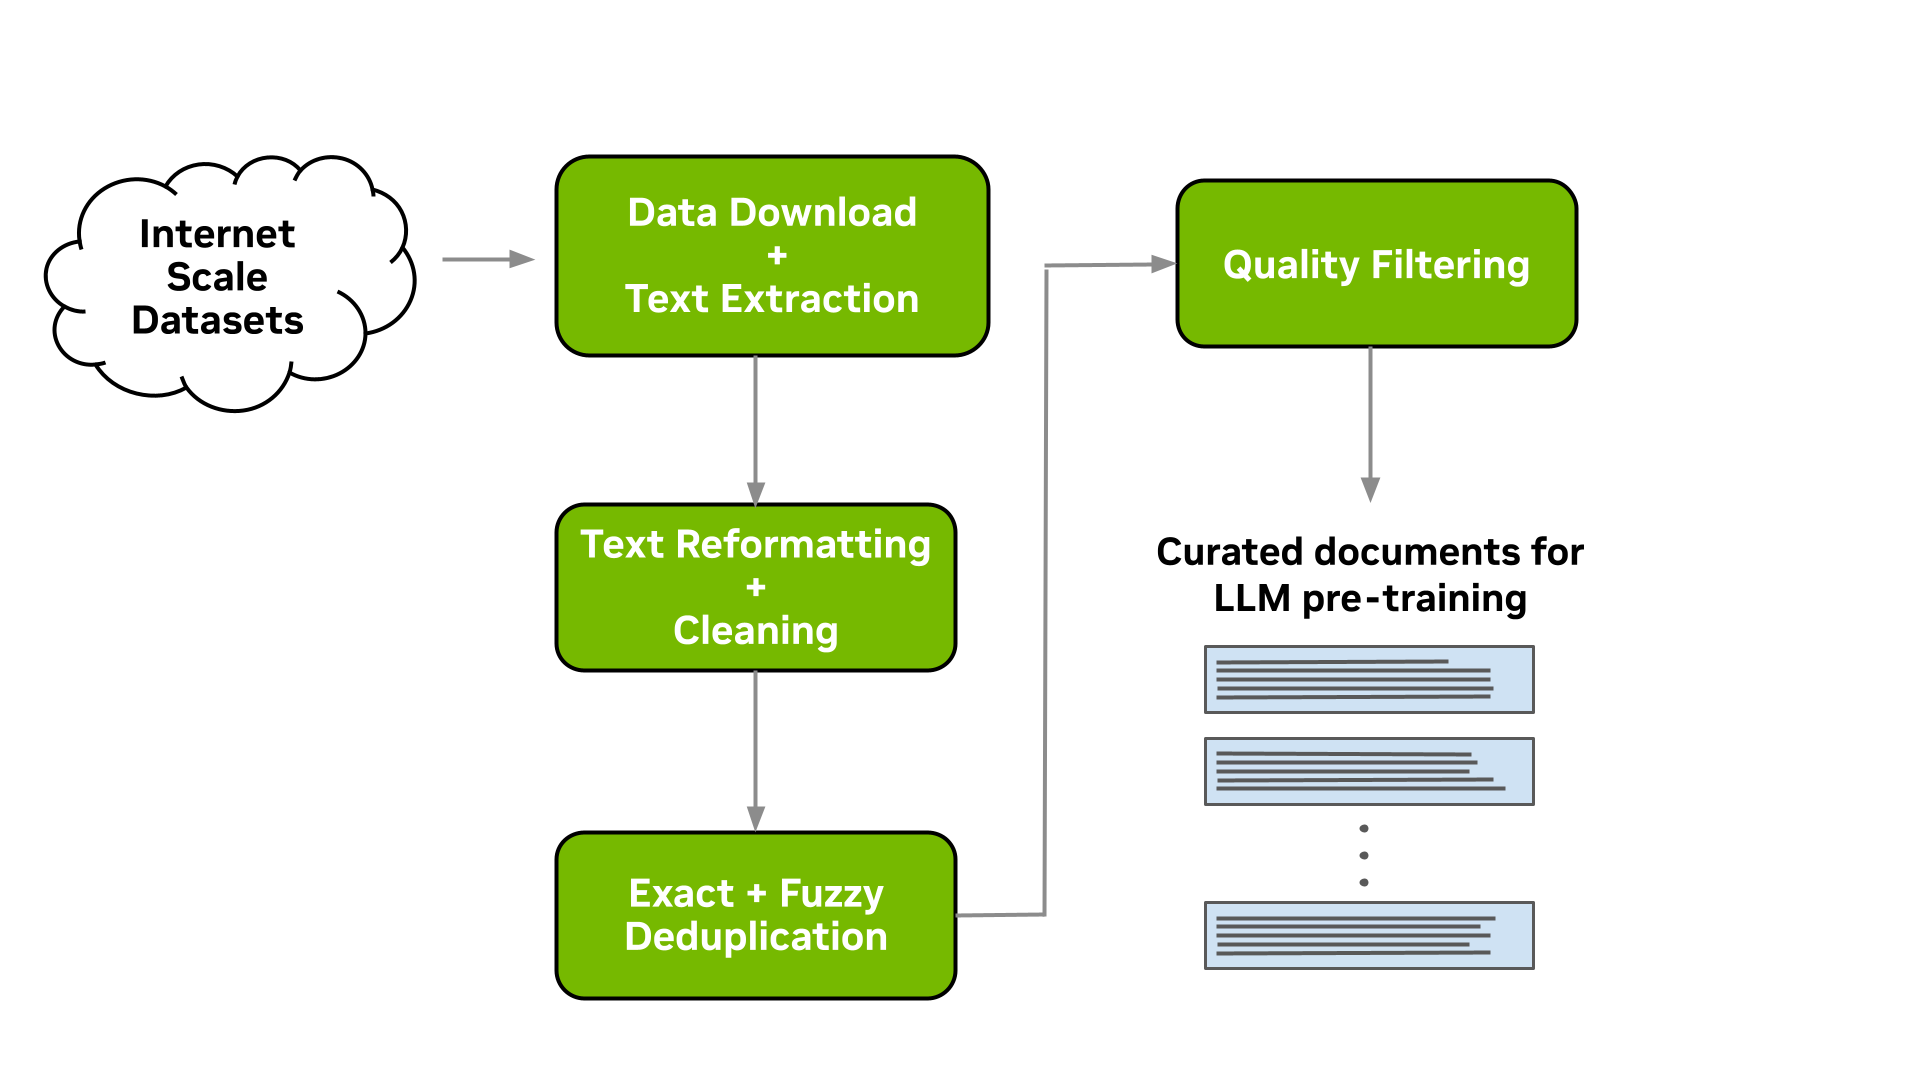 Workflow diagram depicts the download and extraction, fuzzy deduplication, and quality-filtering stages of a LLM data-curation pipeline. 